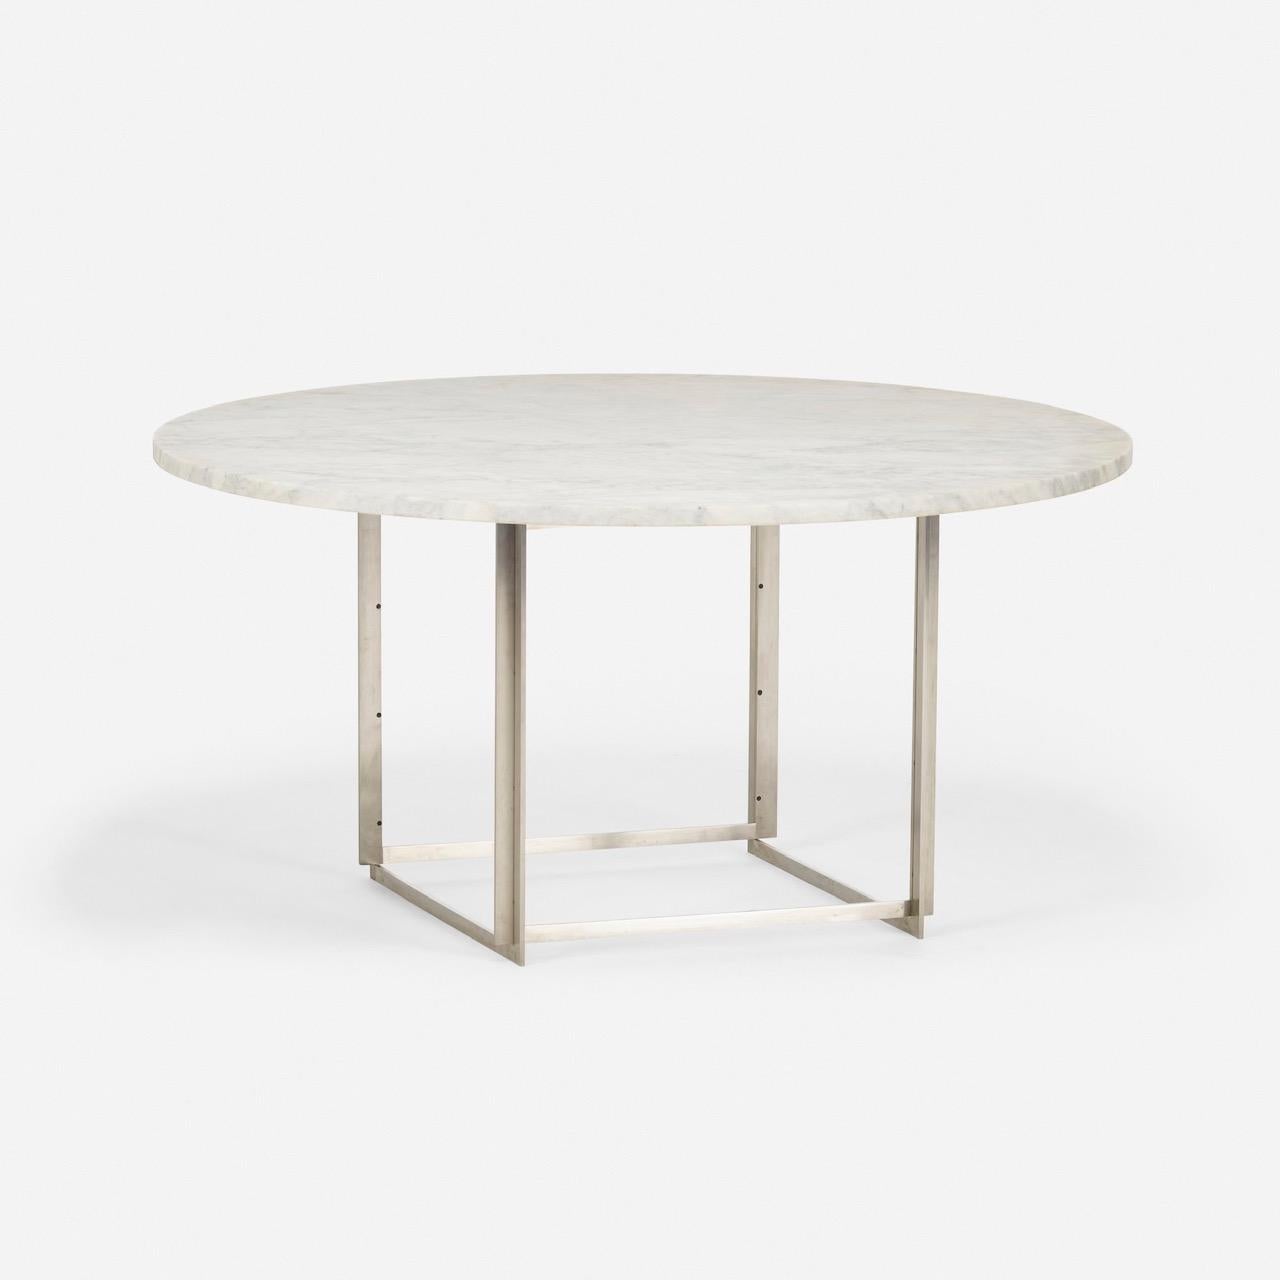 Mid-Century Modern Poul Kjaerholm Marble and Maple PK54 Round Dining Table